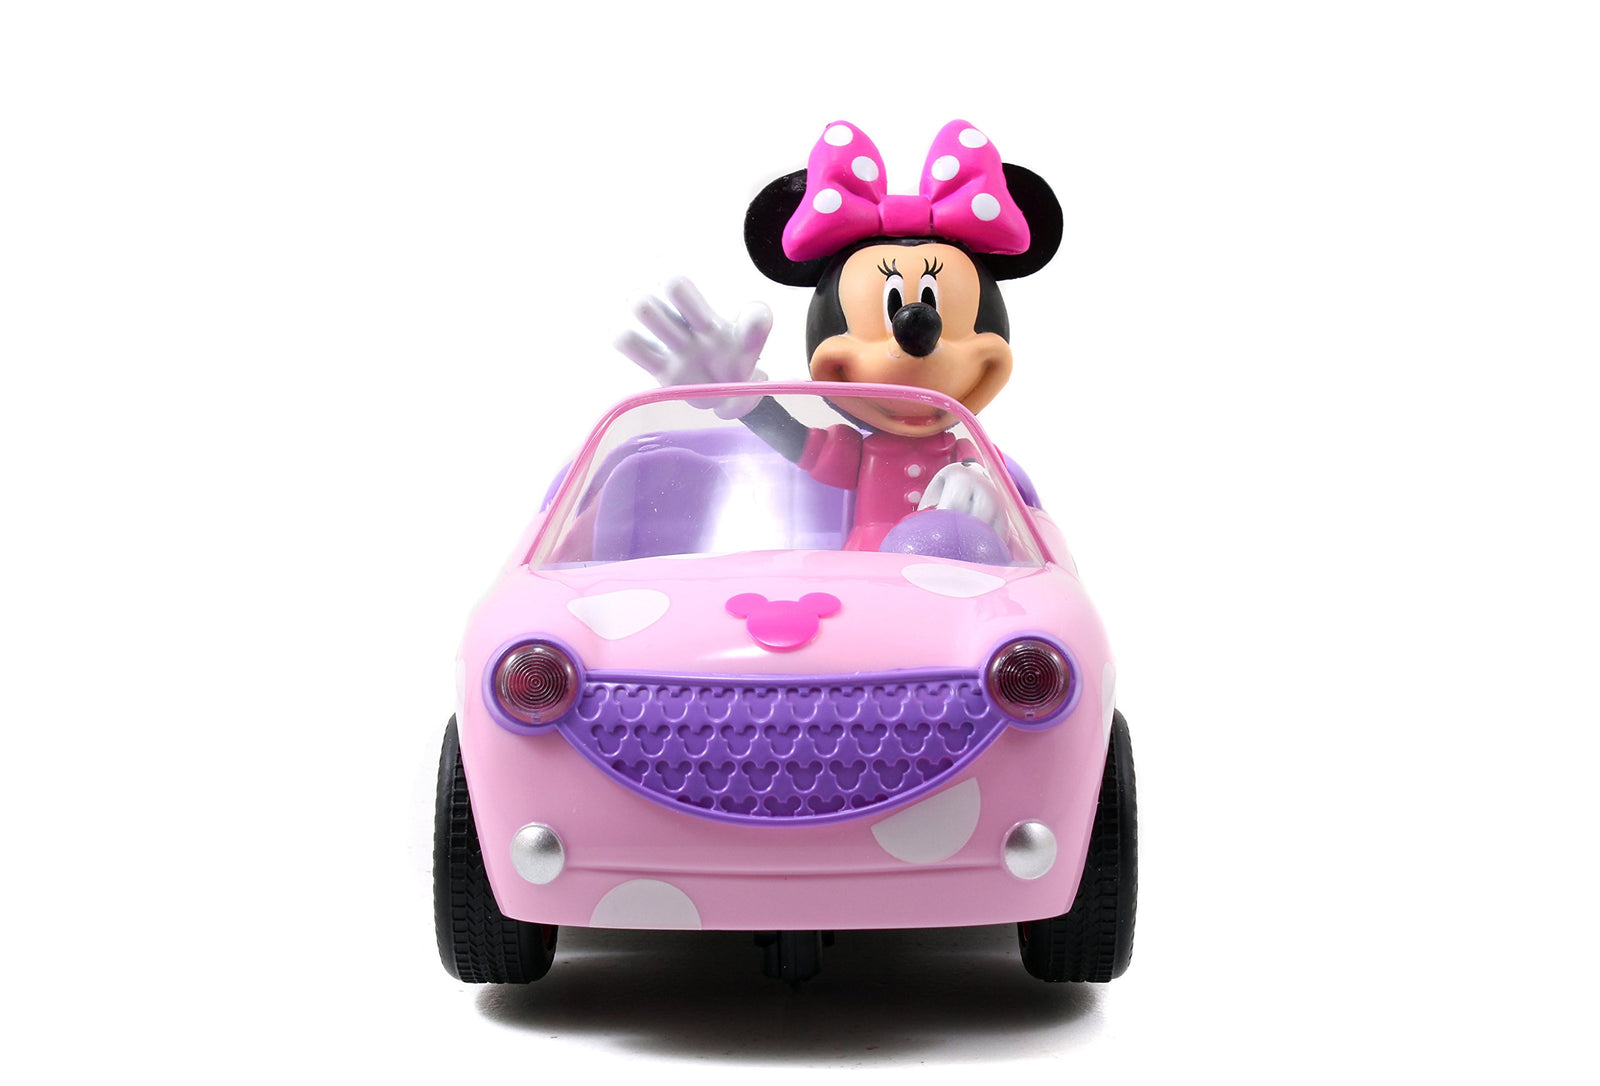 Disney Junior Minnie Mouse Roadster RC Car with Polka Dots, 27 MHz, Pink with White Polka Dots, Standard (97161)